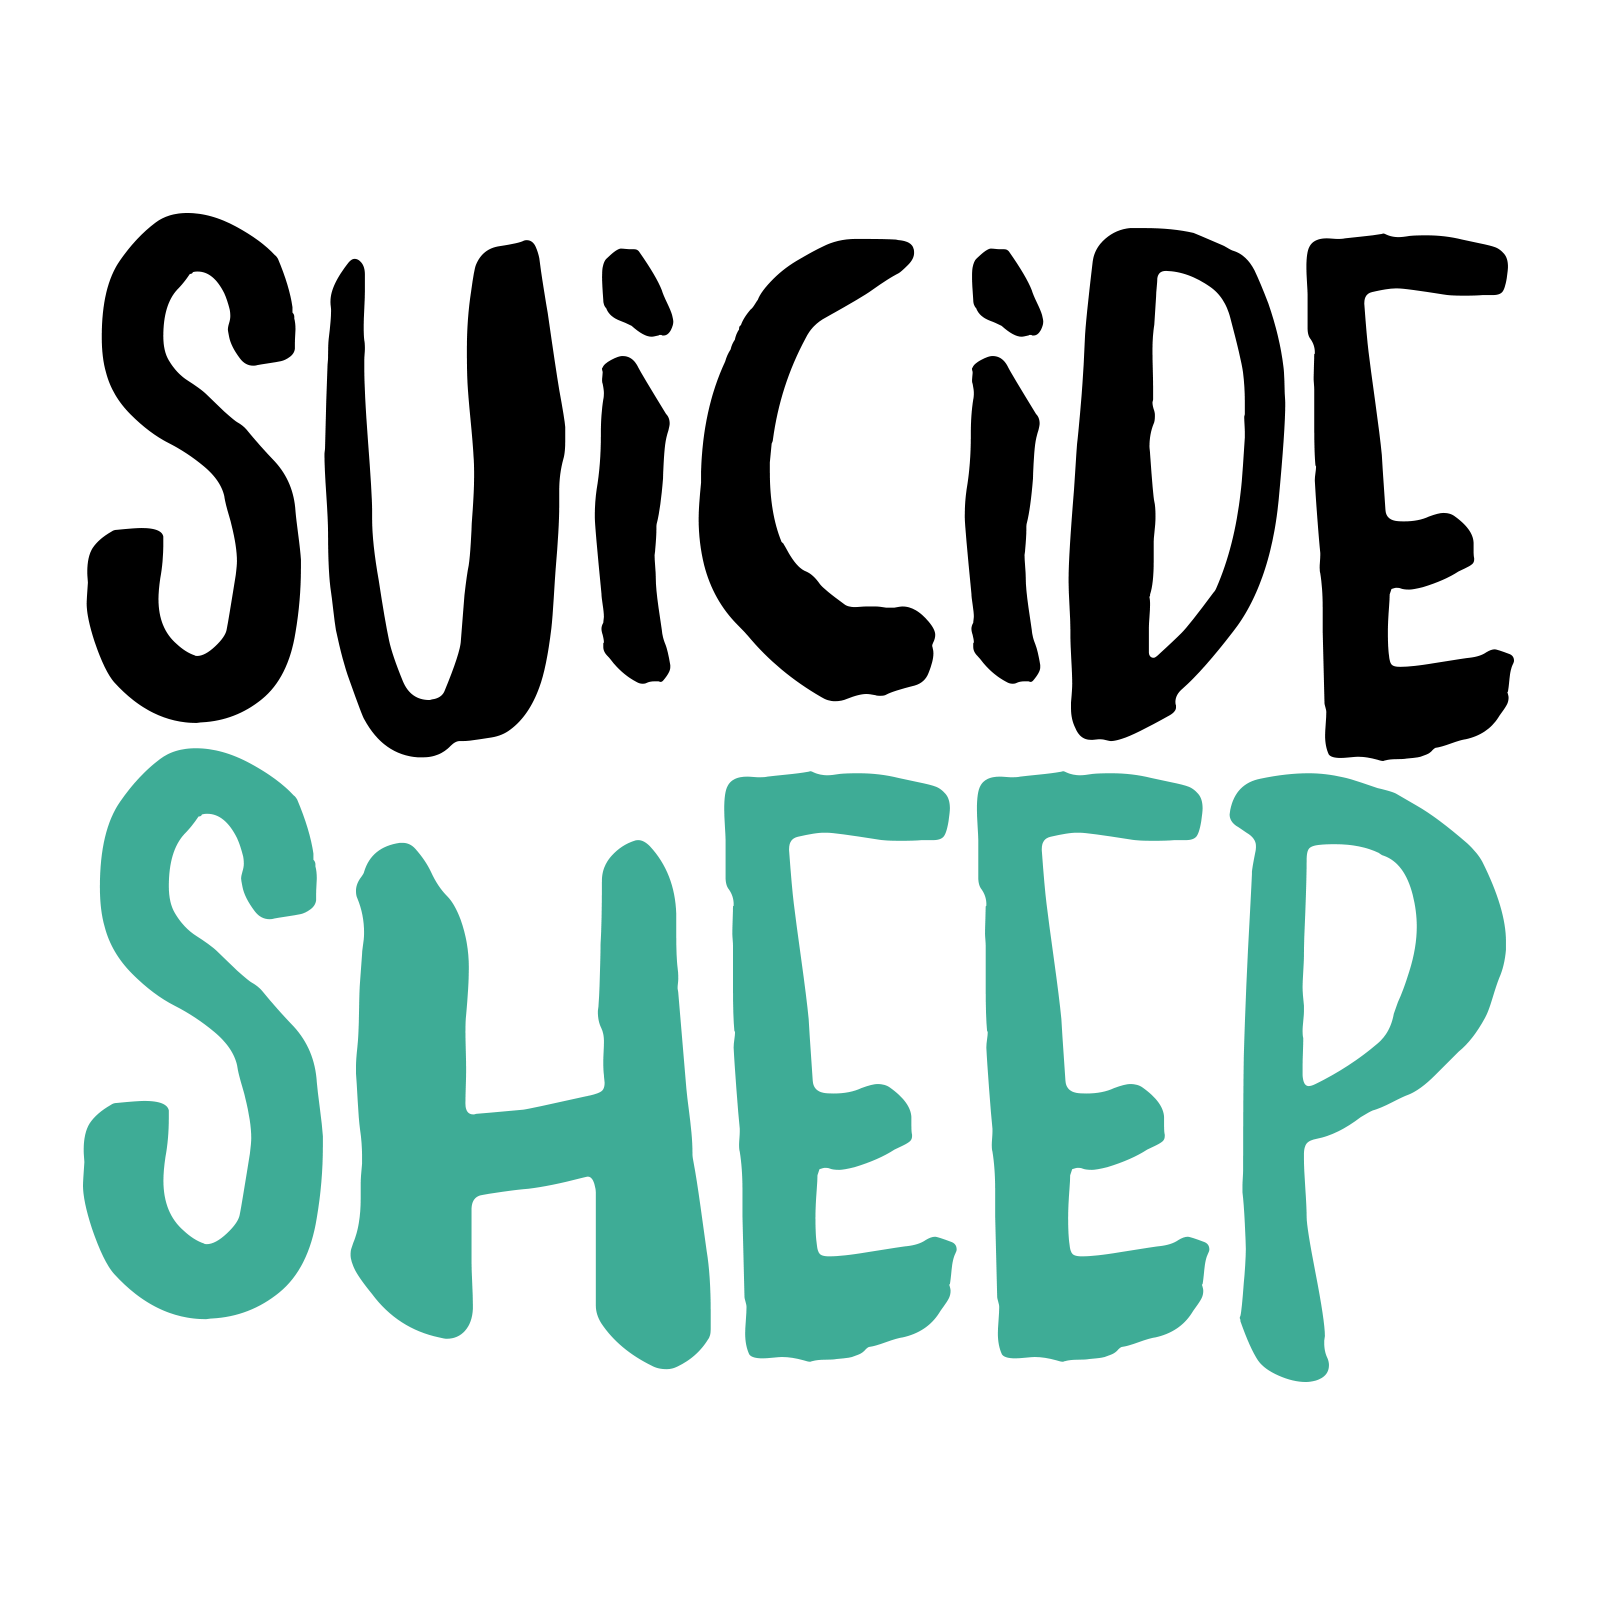 submission-portal-mr-suicide-sheep-png-1600_1600.png